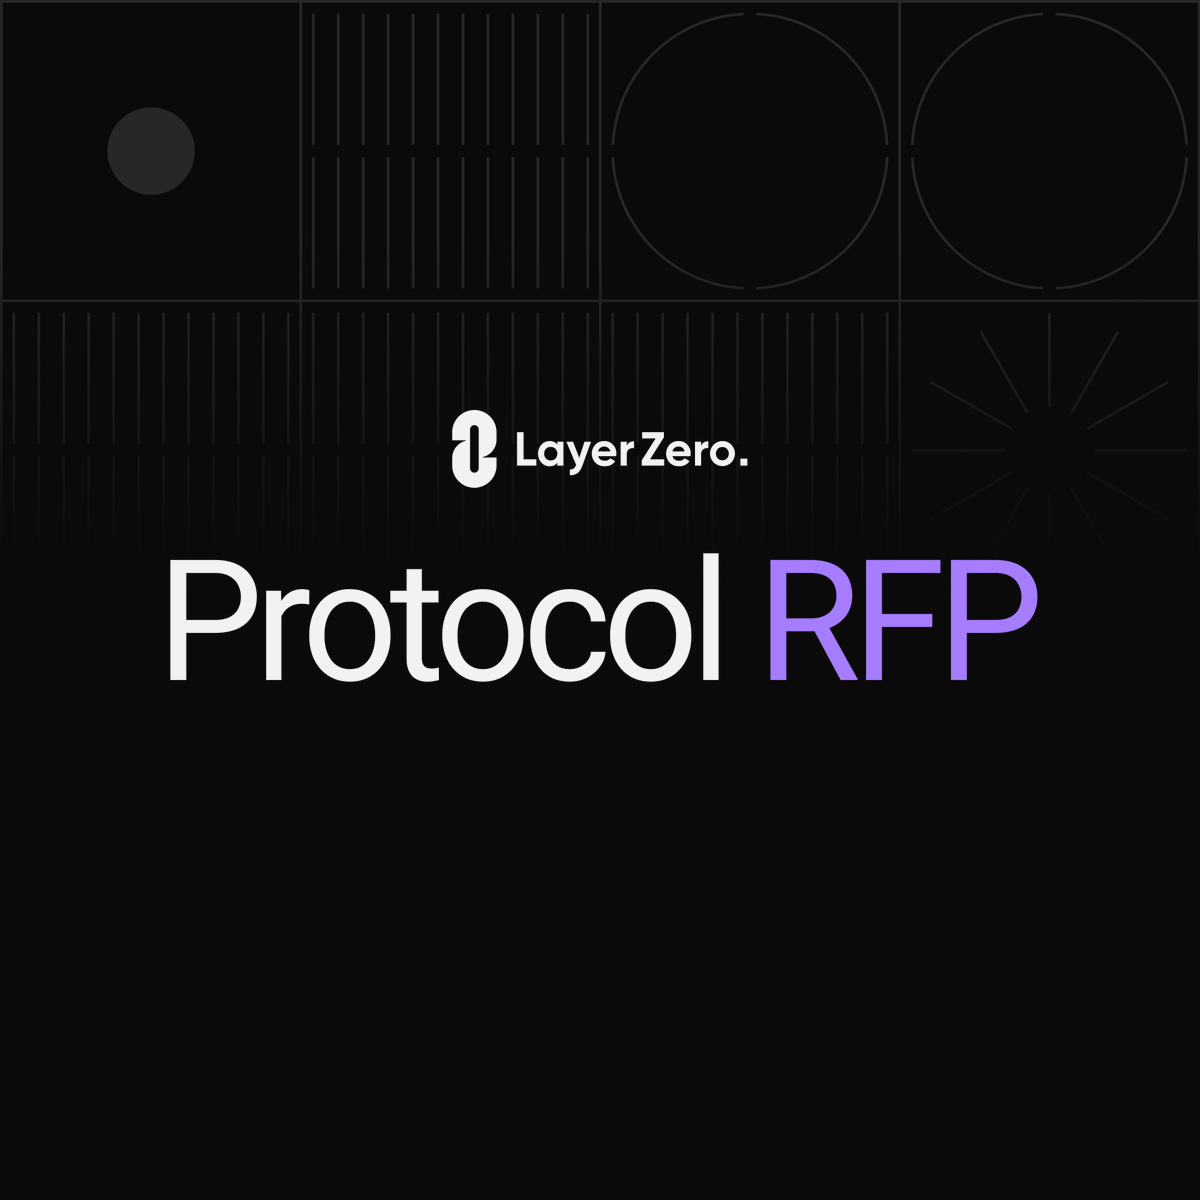 Today, LayerZero introduces the Protocol RFP, marking the first step toward finalizing the TGE allocation. Developers are the lifeblood of LayerZero – this RFP allows each project to establish its own allocation criteria relative to its overall token allocation. Additionally,